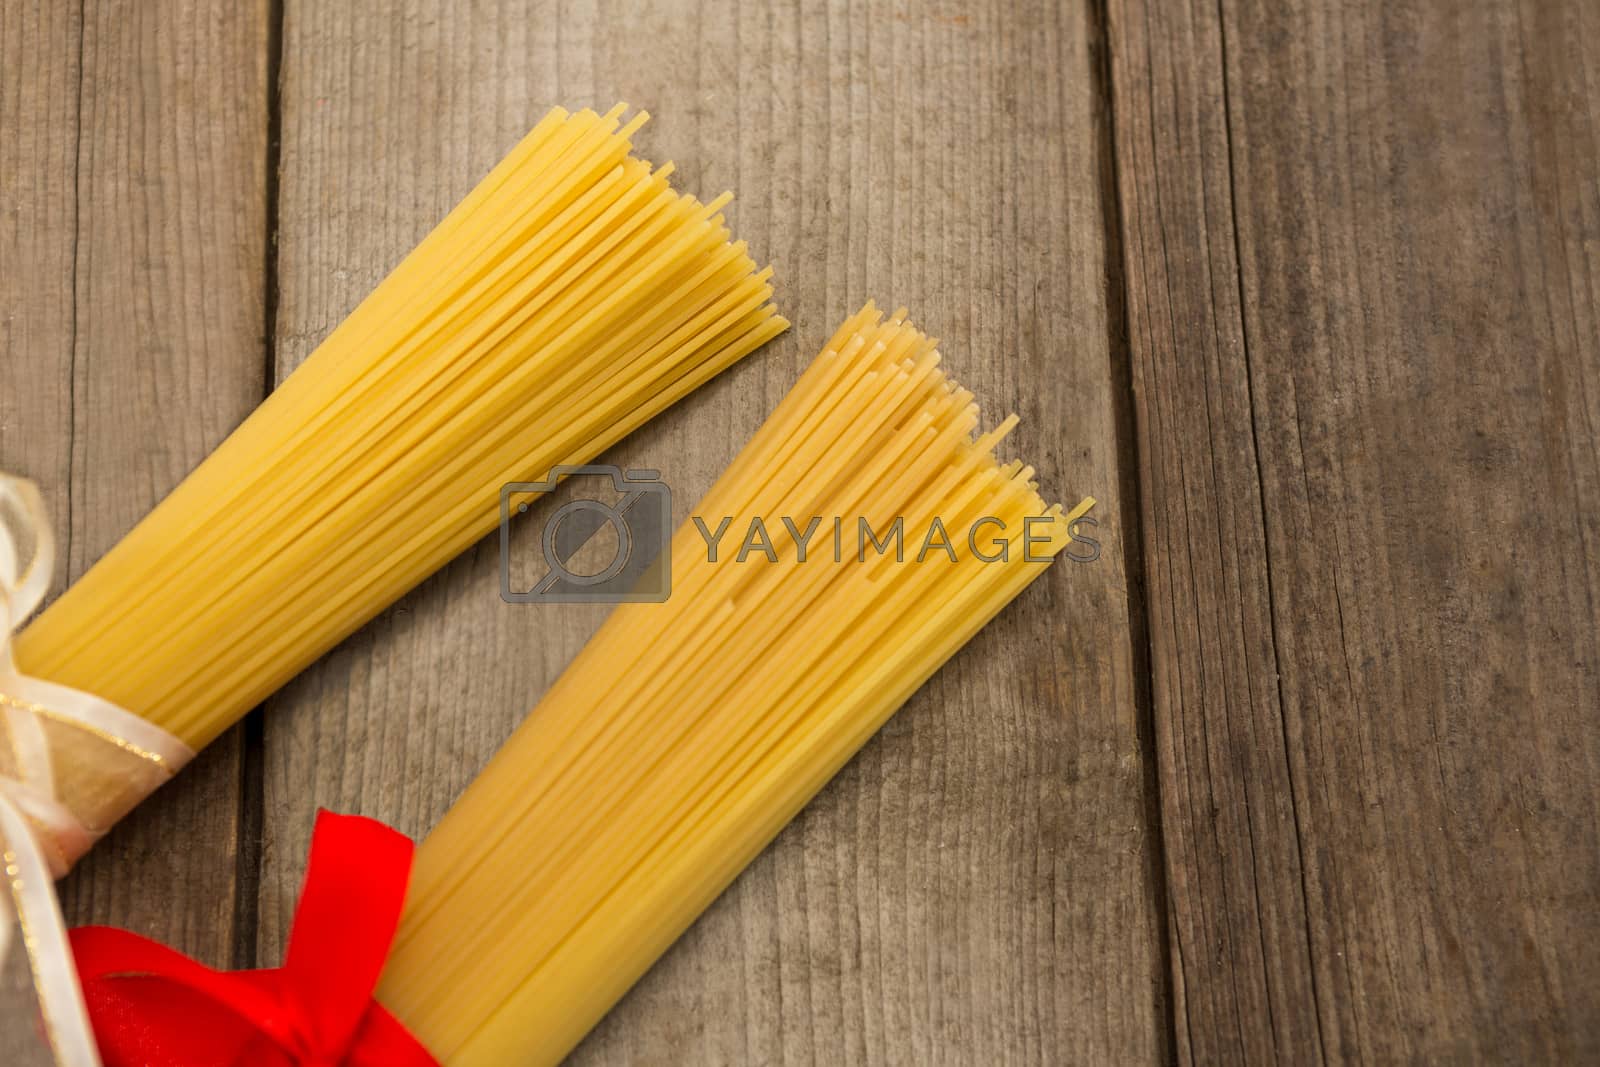 Royalty free image of Bundles of raw spaghetti tied with ribbons by Wavebreakmedia